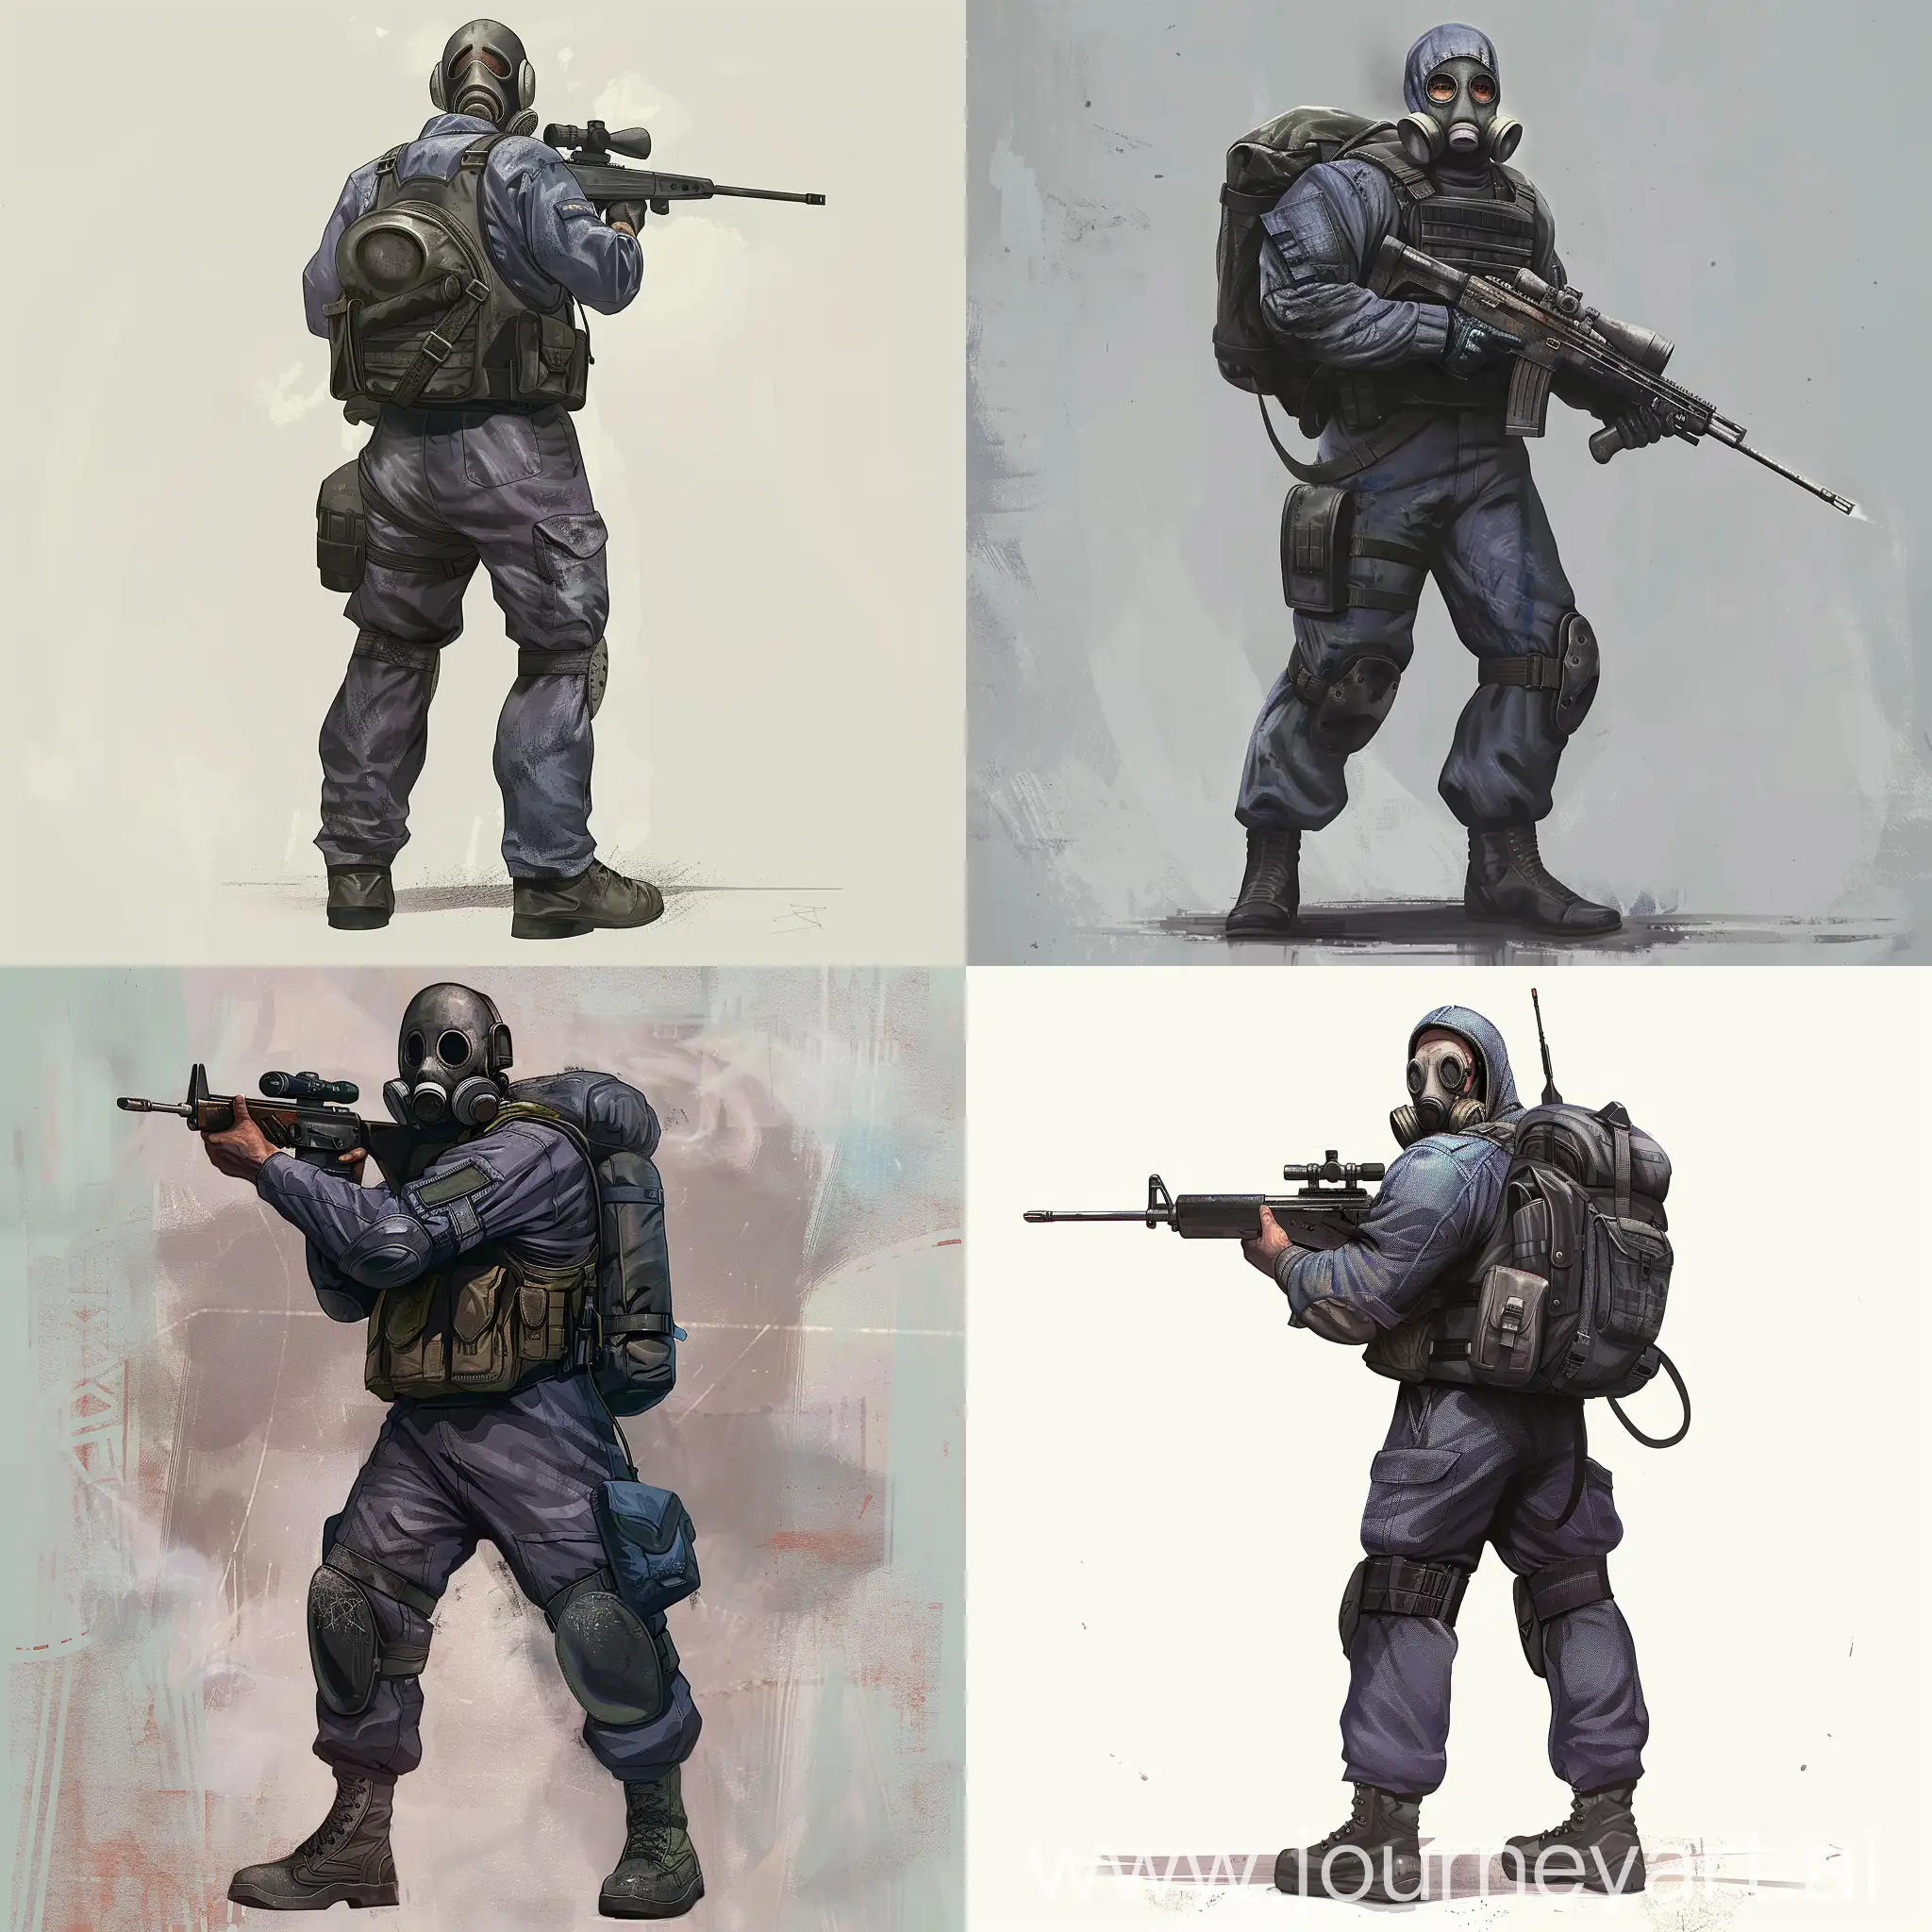 Concept character art, dark purple military jumpsuit, gasmask on his face, small military backpack, military unloading on his body, sniper rifle in his hands.